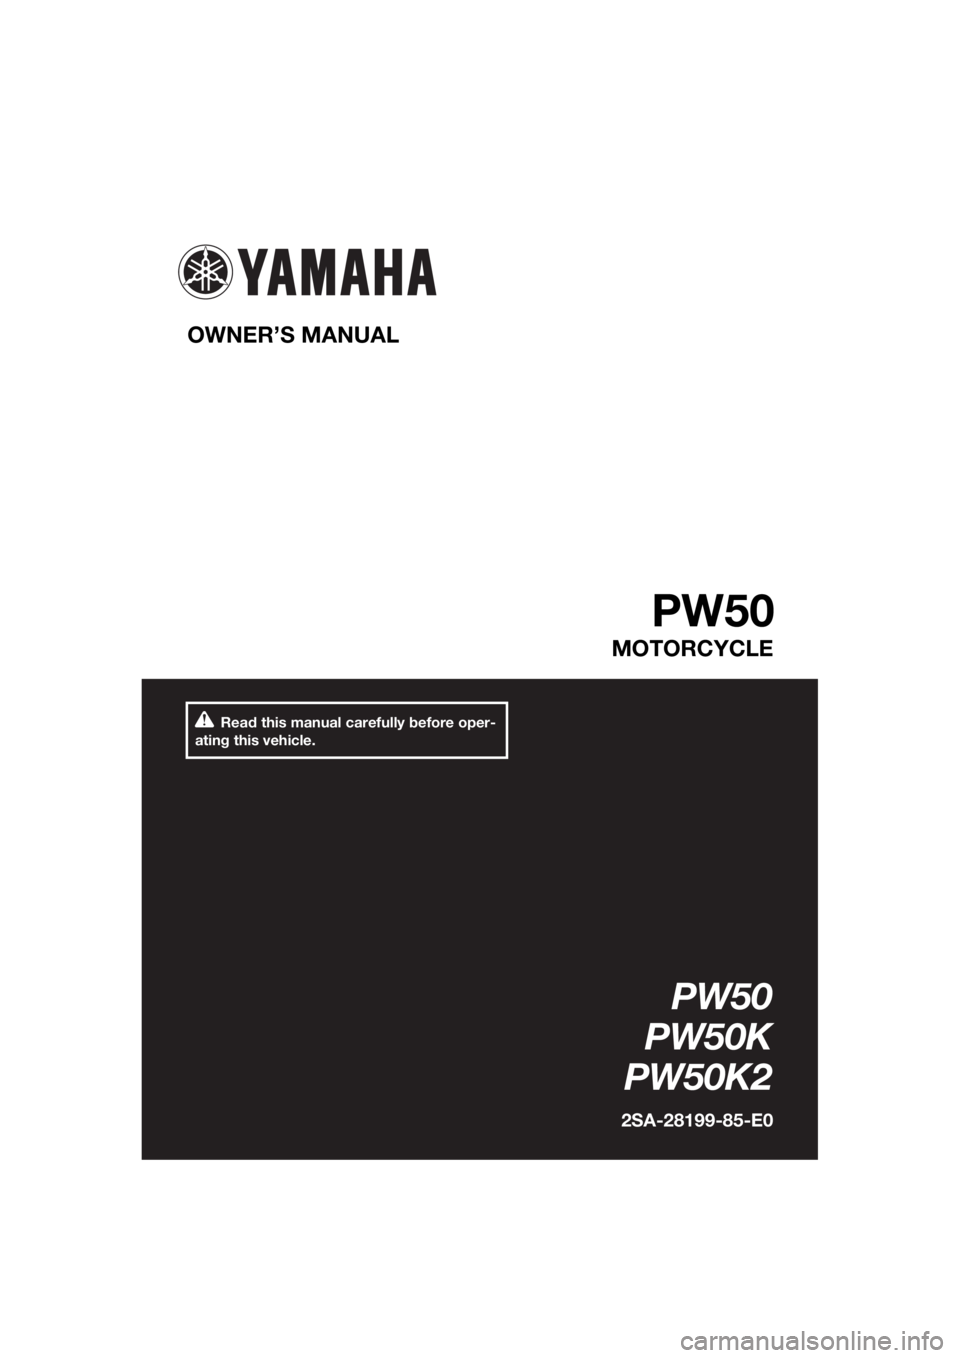 YAMAHA PW50 2019  Owners Manual Read this manual carefully before oper-
ating this vehicle.
OWNER’S MANUAL 
PW50
MOTORCYCLE
PW50
PW50K
PW50K2
2SA-28199-85-E0
U2SA85E0.book  Page 1  Friday, May 11, 2018  9:07 AM 